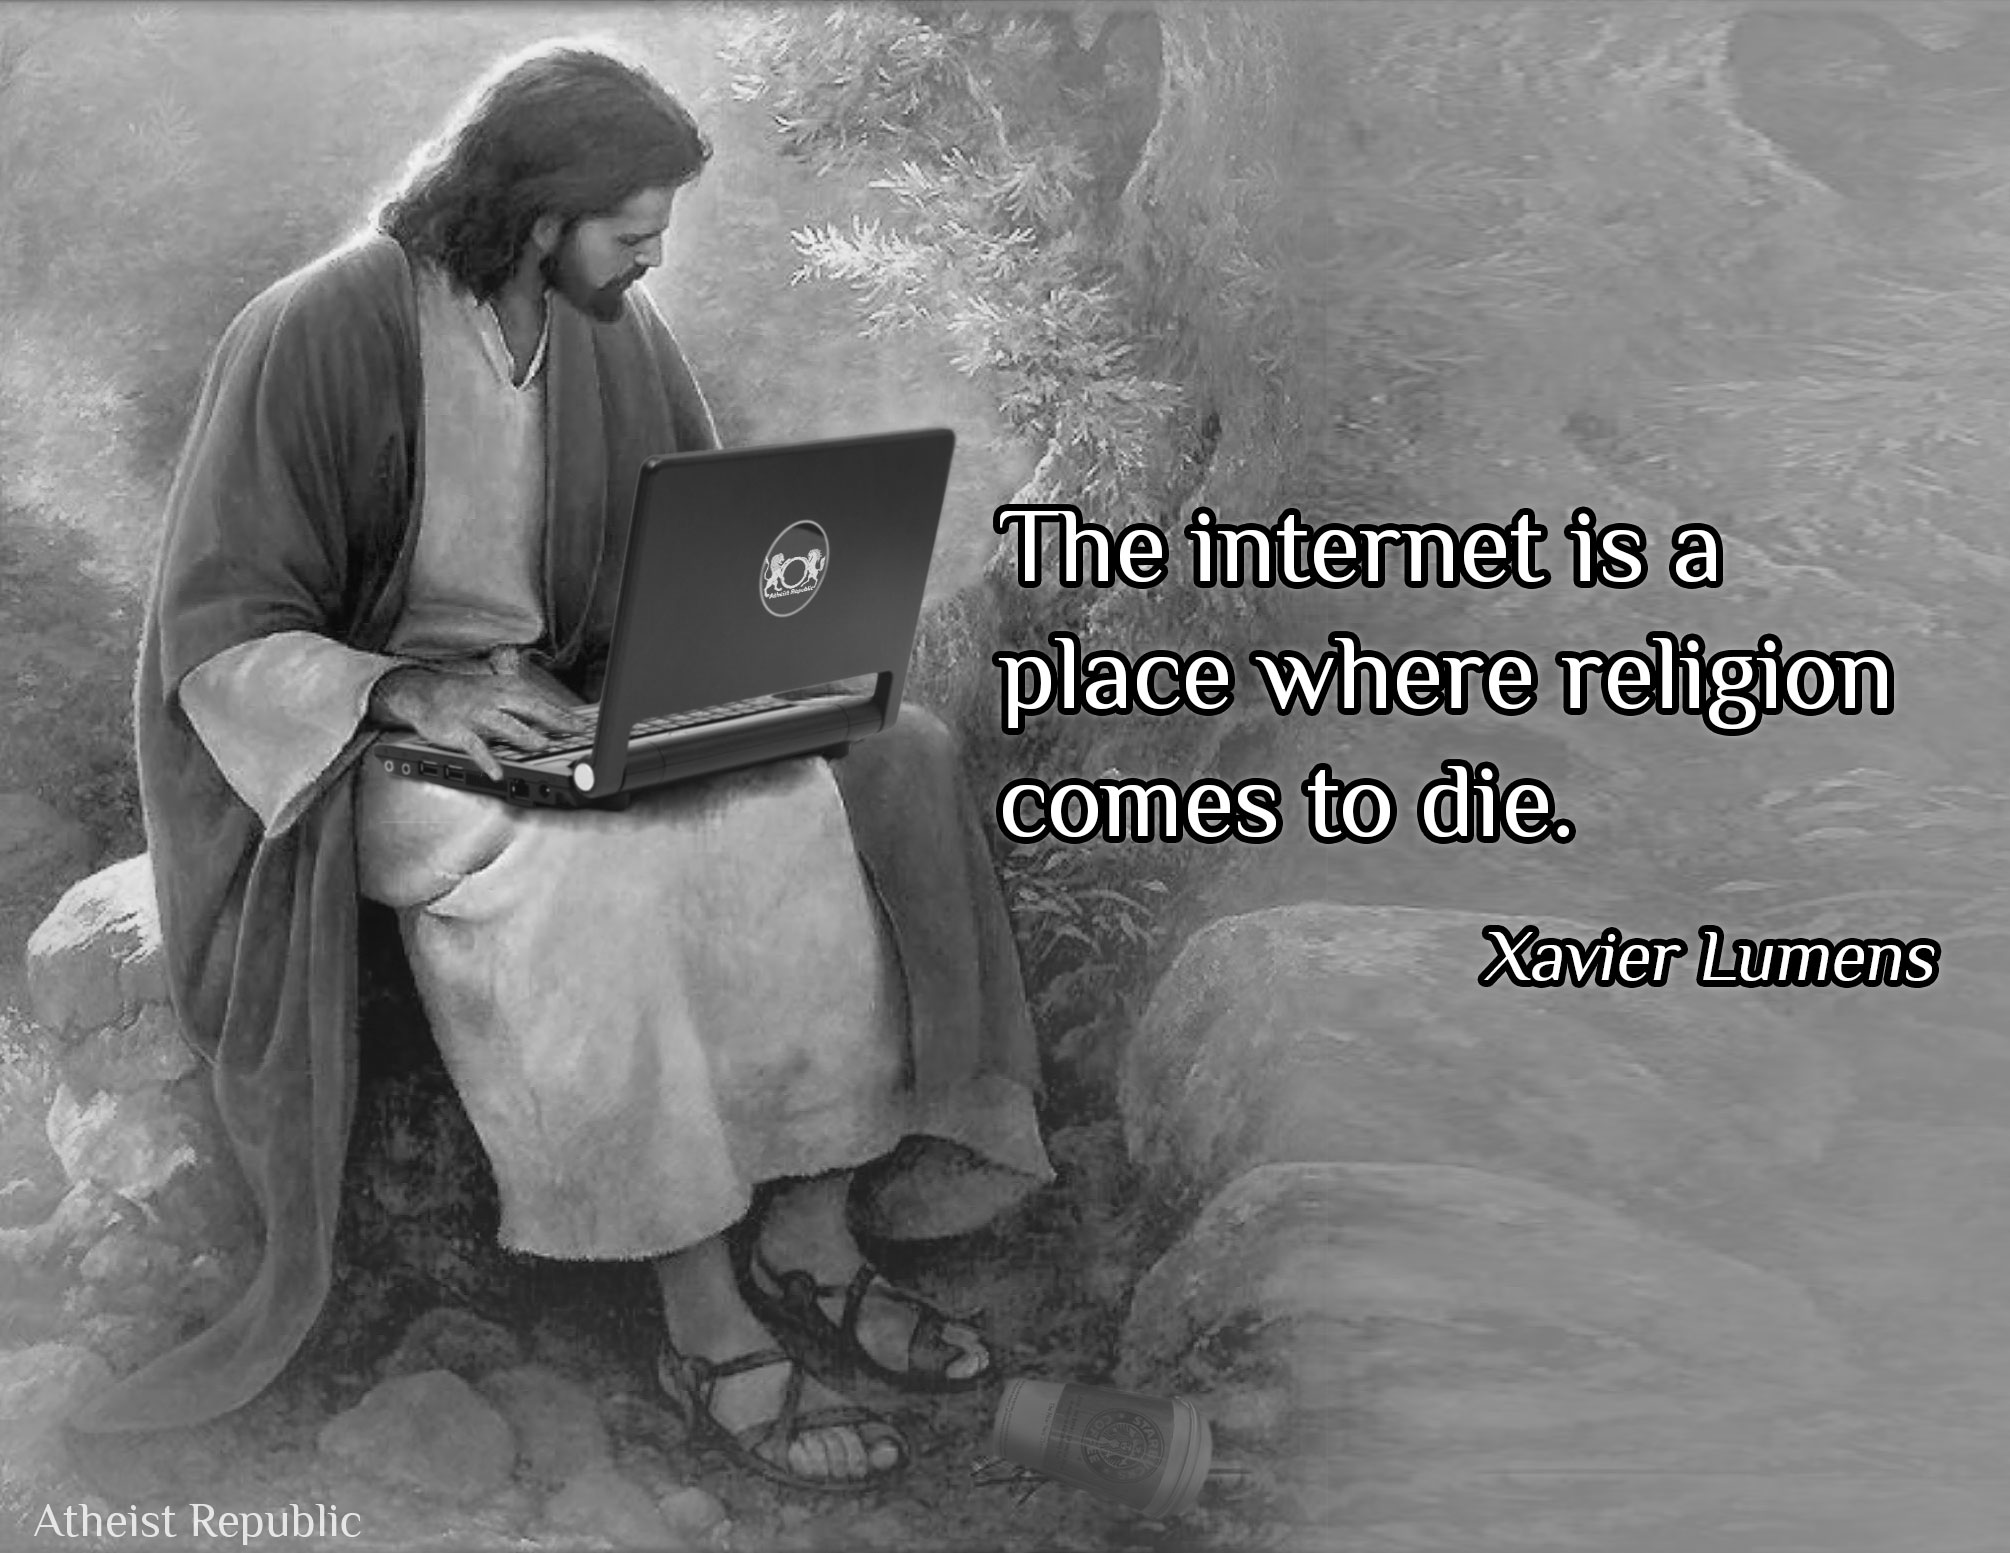 The%20Internet%20is%20a%20place%20where%20religion%20comes%20to%20die%20-%20Xavier%20Lumens.jpg